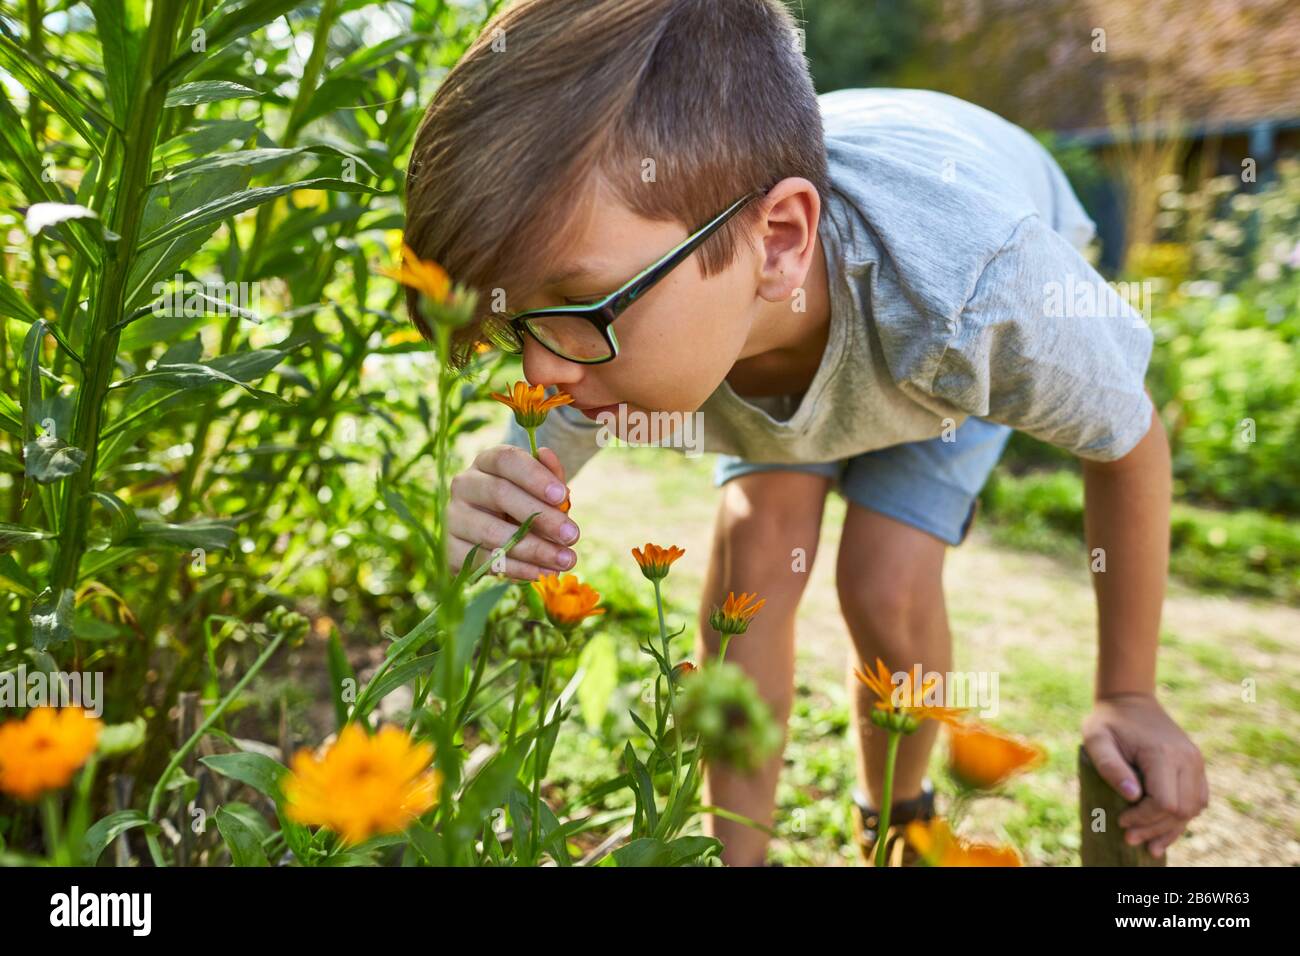 Children investigating food. Series: Preparation of a herbal drink. Picking edible flowers. Learning according to the Reggio Pedagogy principle, playful understanding and discovery. Germany. Stock Photo